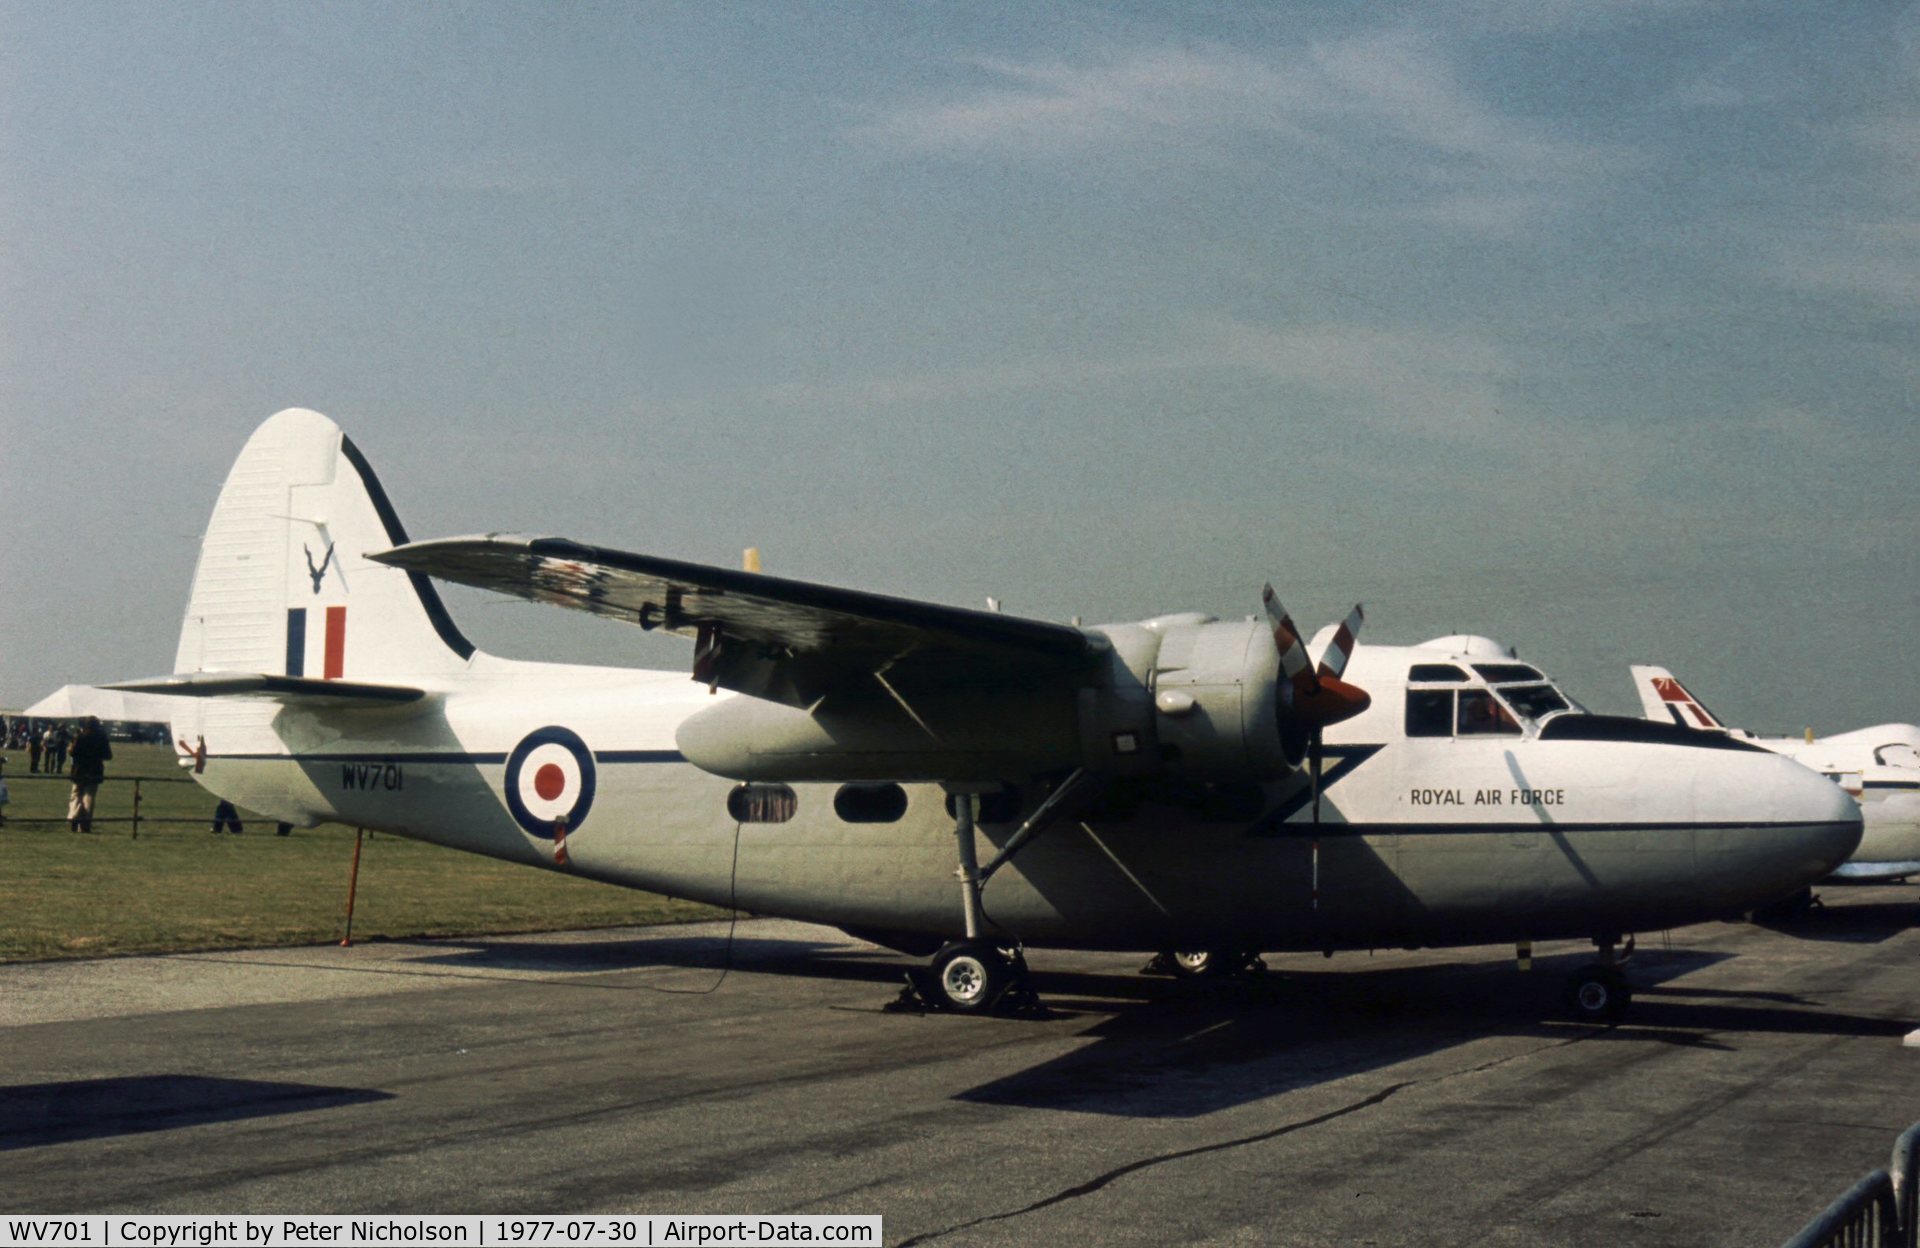 WV701, 1953 Hunting Percival P-66 Pembroke C1 C/N PAC/66/04, Pembroke C.1 of 60 Squadron on display at the 1977 Royal Review at RAF Finningley.